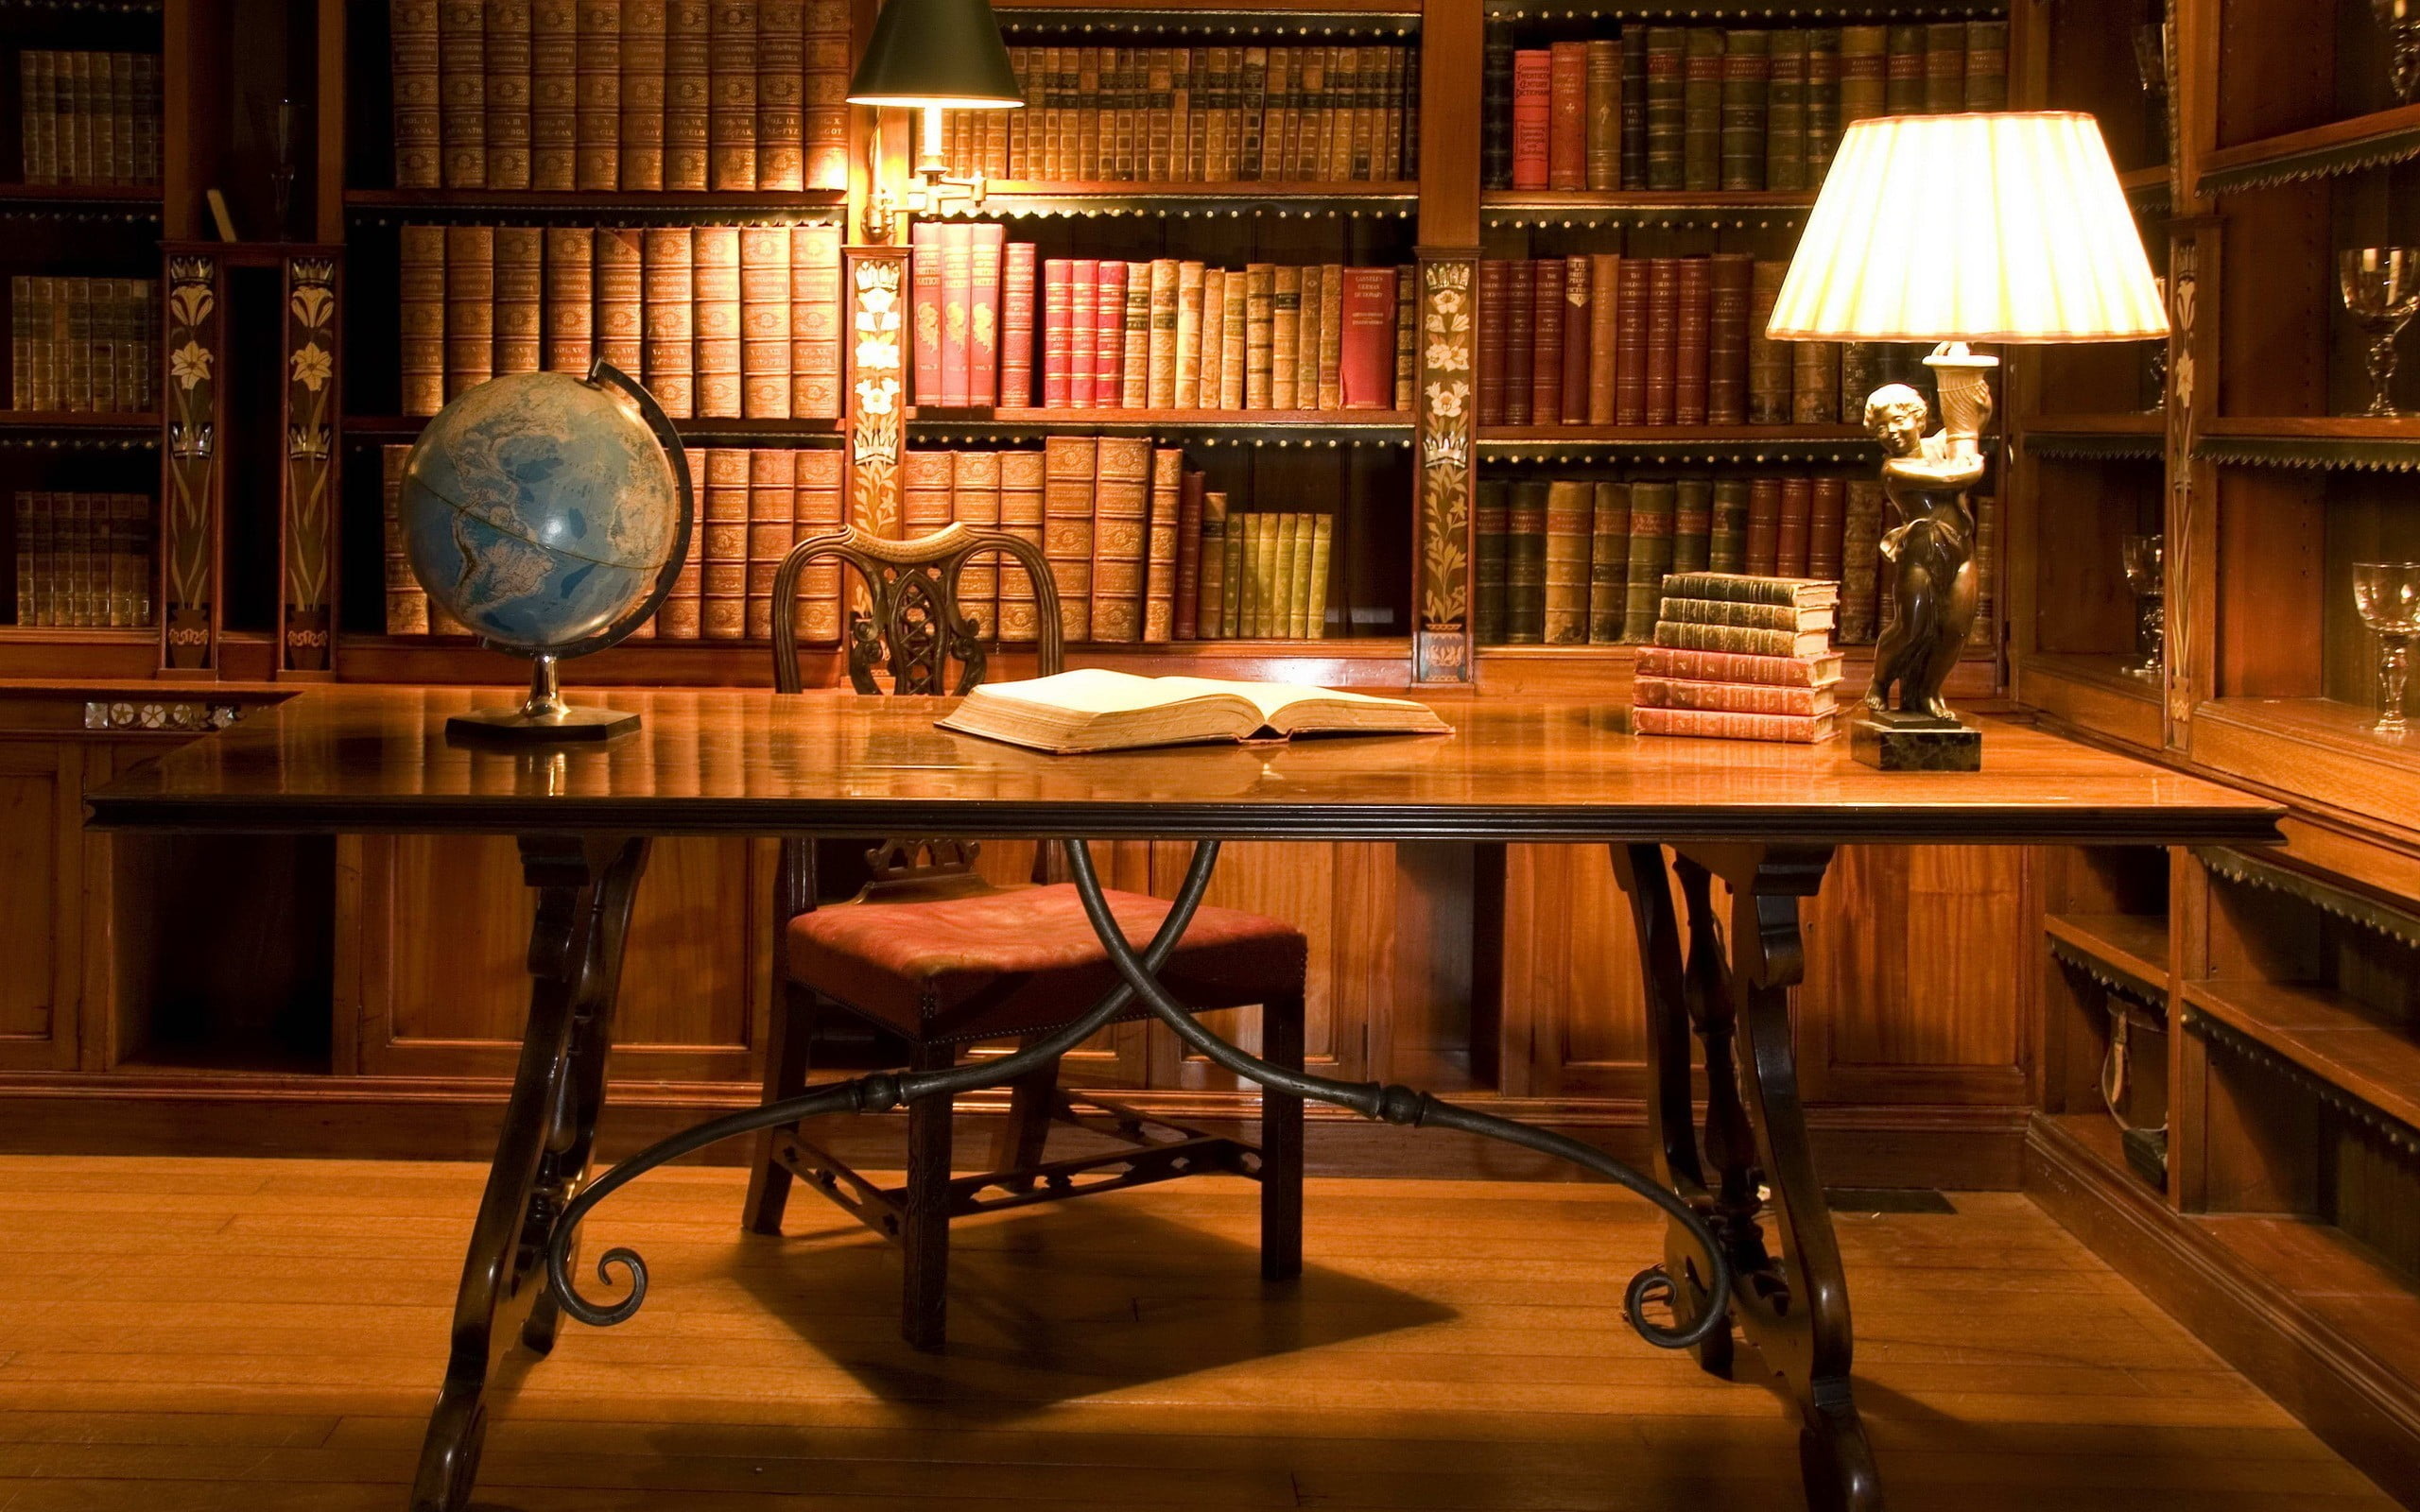 brown wooden table with chairs, books, desk, lamp, globes, indoors